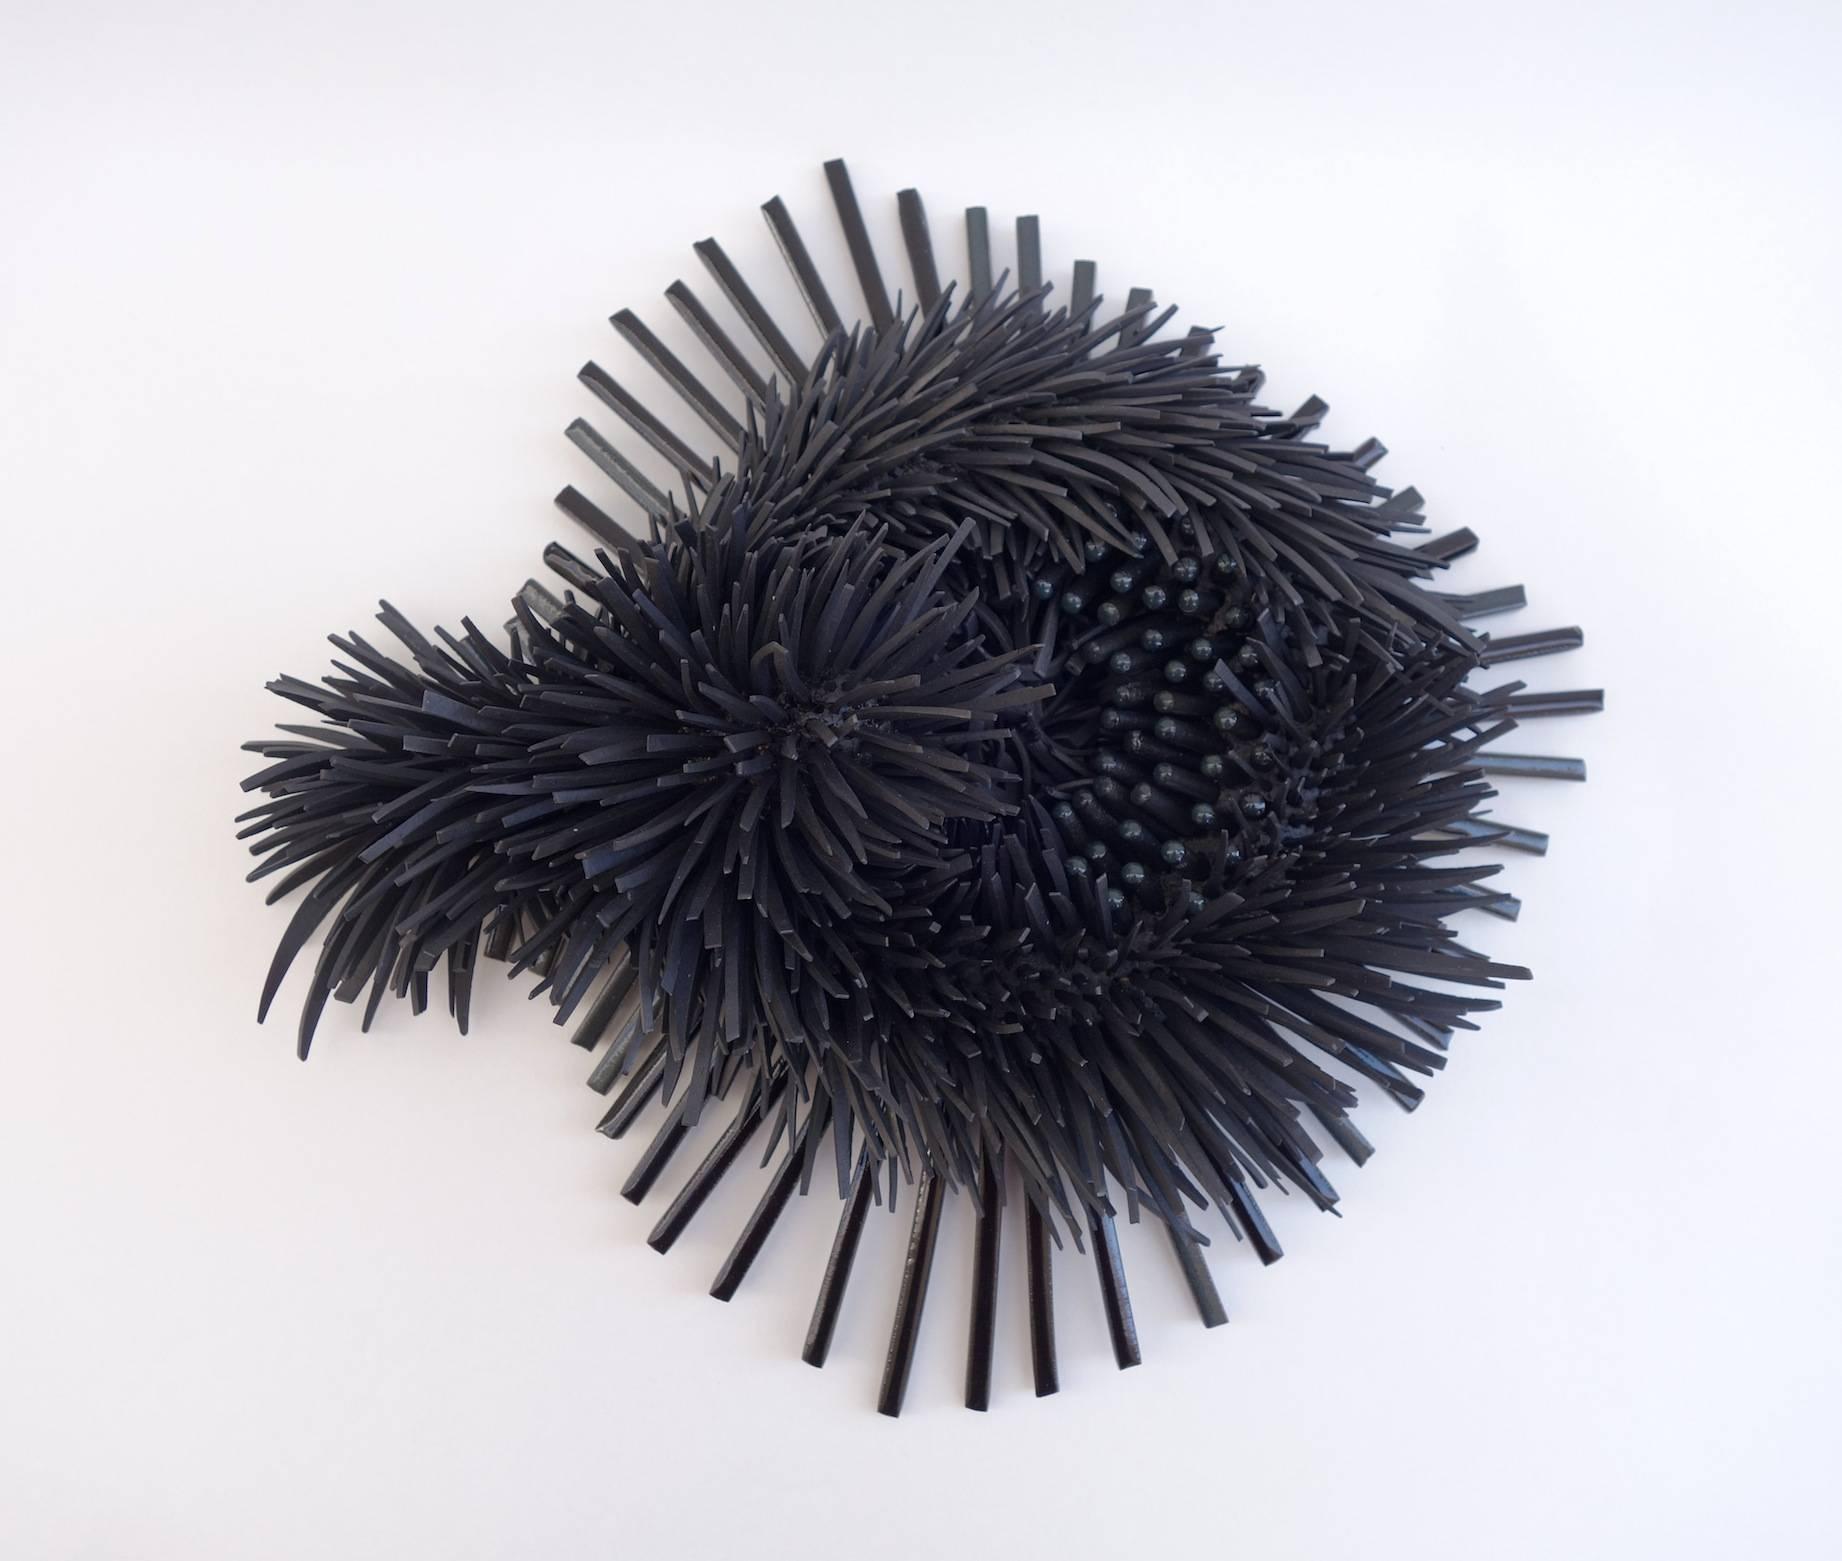 Peled was born and raised in a Kibbutz in the northern part of Israel.  After completing a BA (Hons) at the Bezalel Academy of Art and Design in Jerusalem she graduated with an MA (Hons) from the Royal College of Art. In recent years her work has